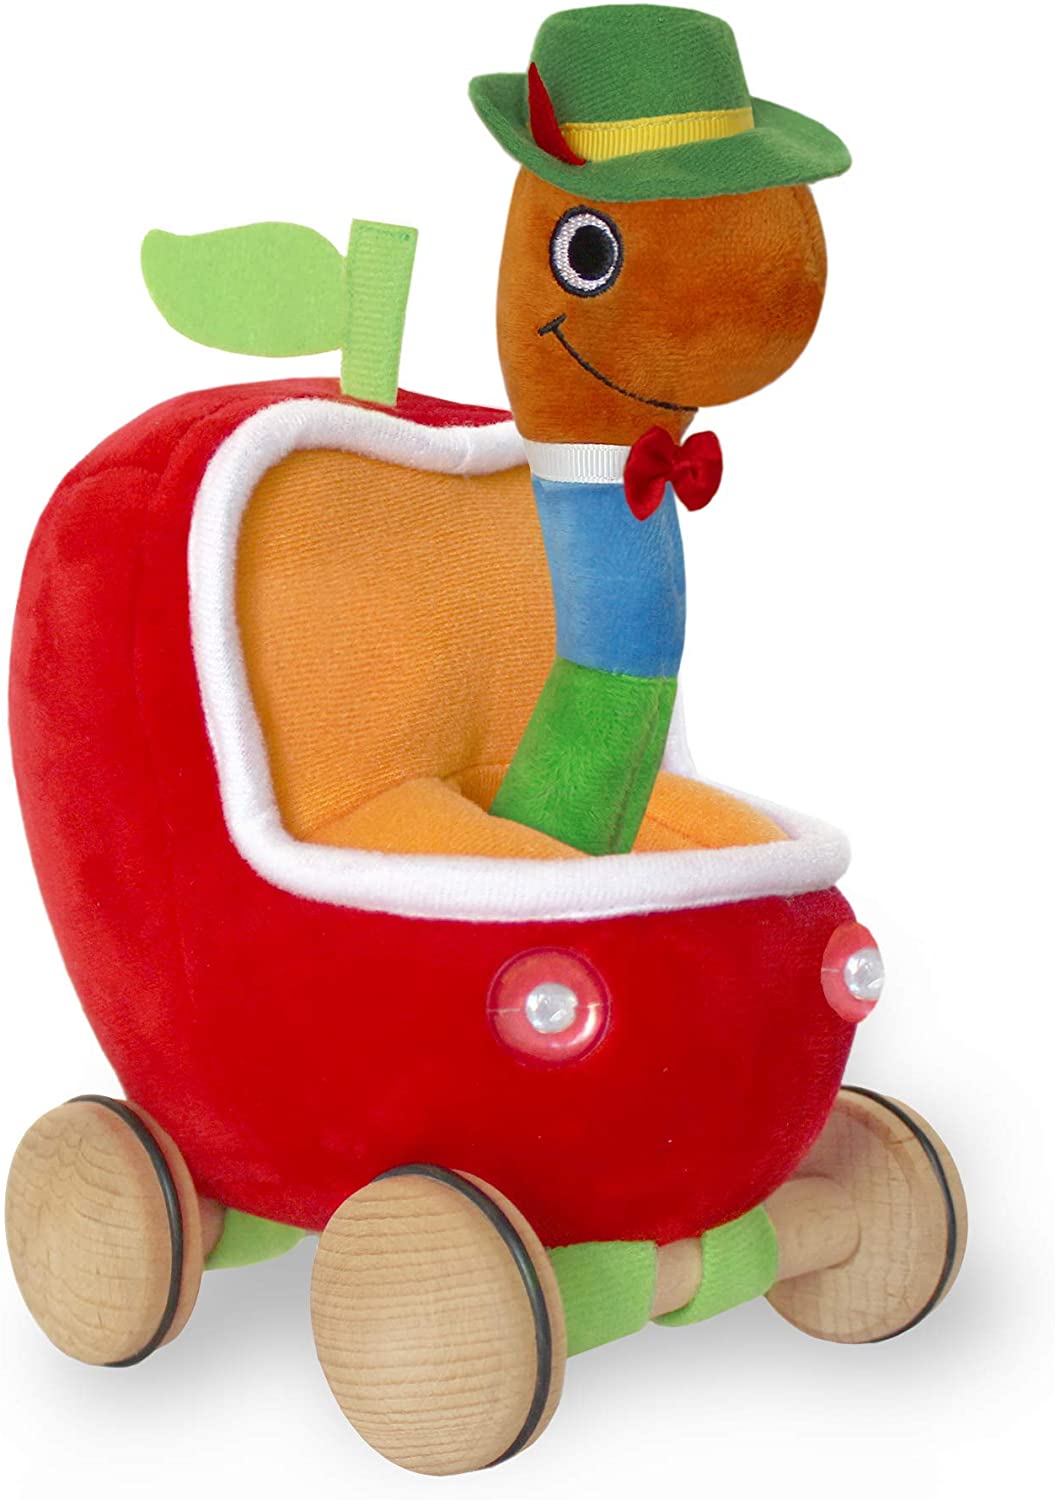 plush worm doll riding in plush apple car on white background.